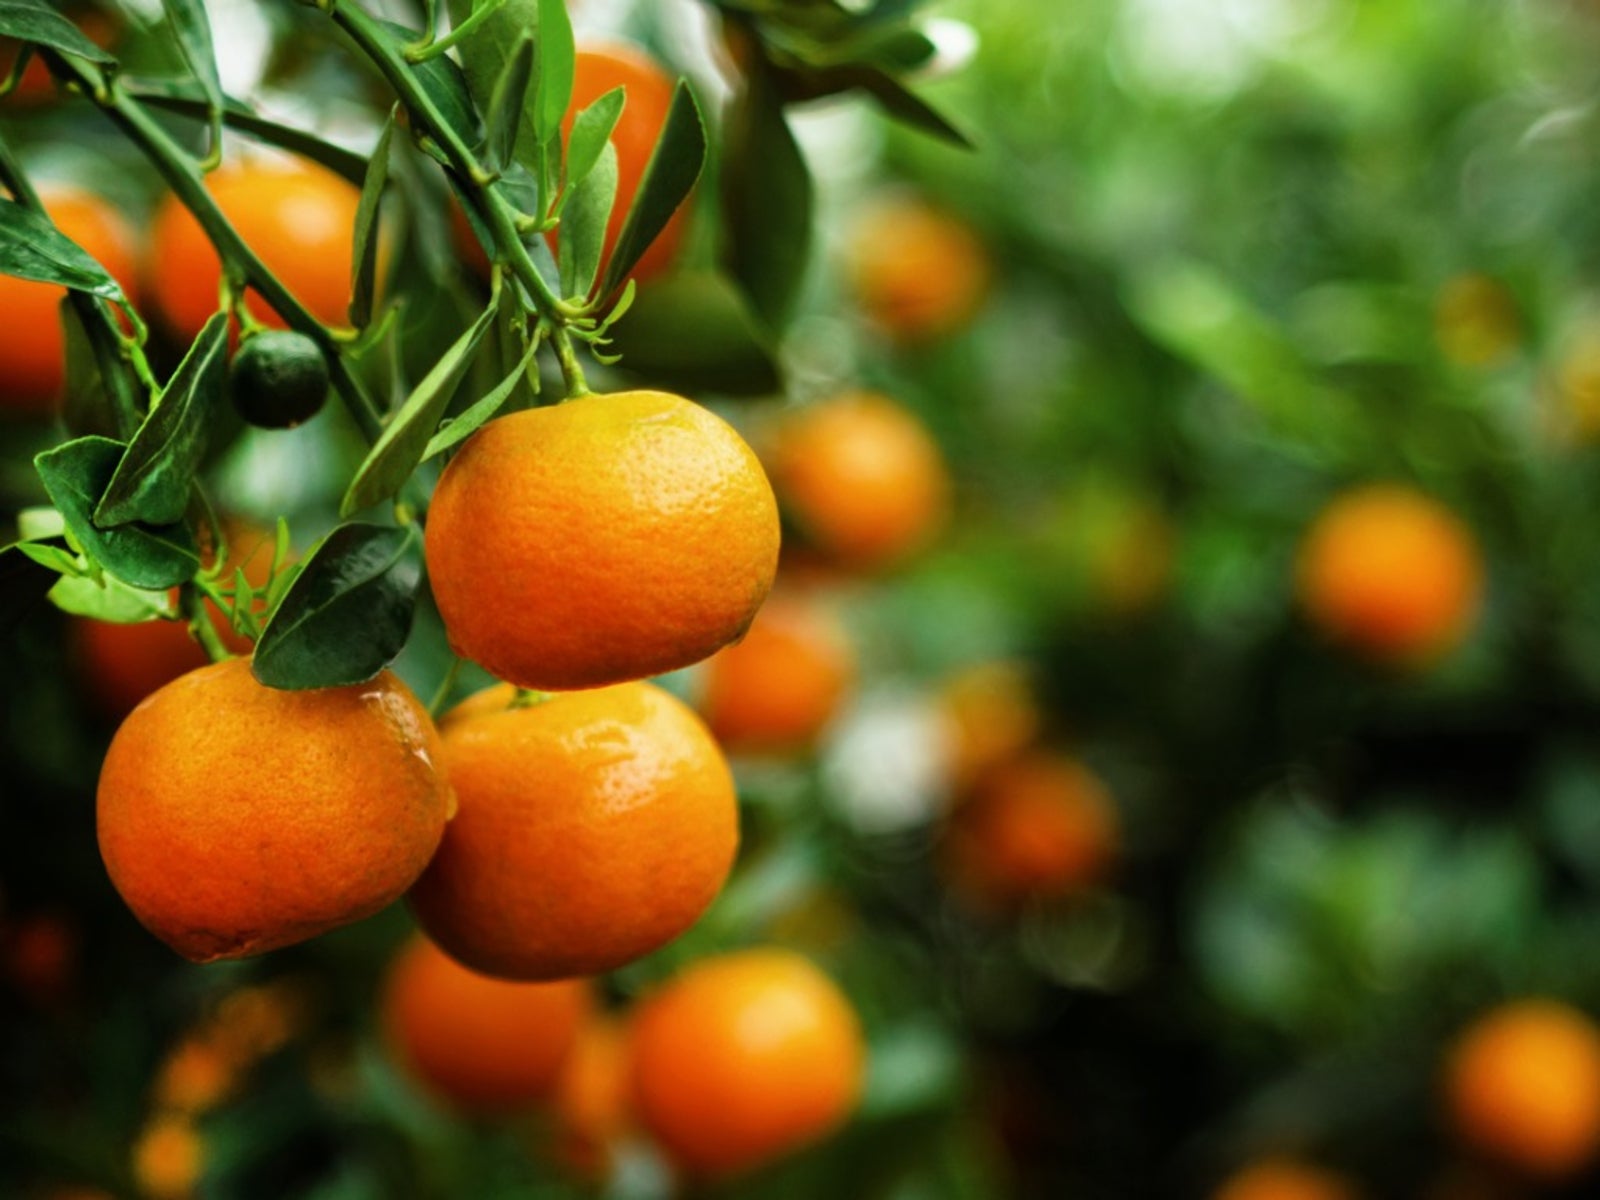 Growing Tangerines: Tips About Caring For Tangerine Trees